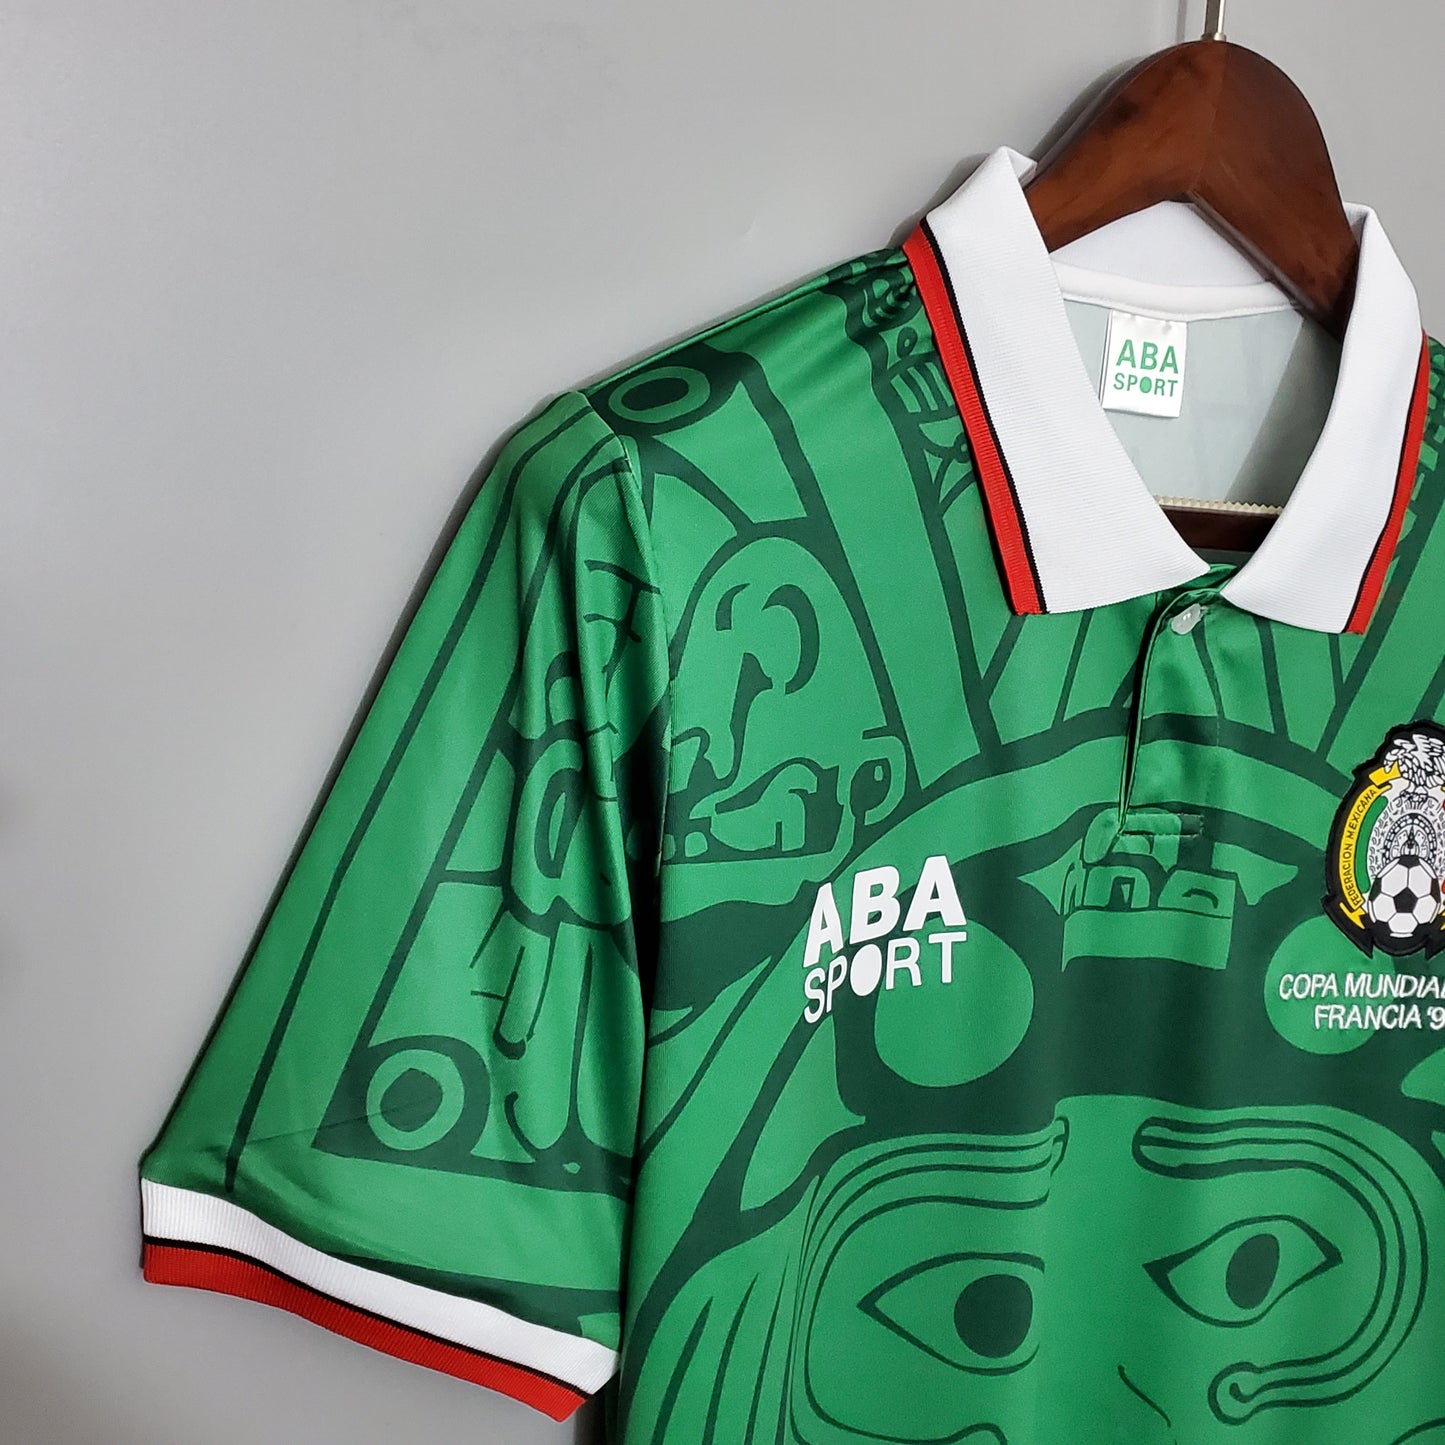 Mexico 1998 Home Jersey